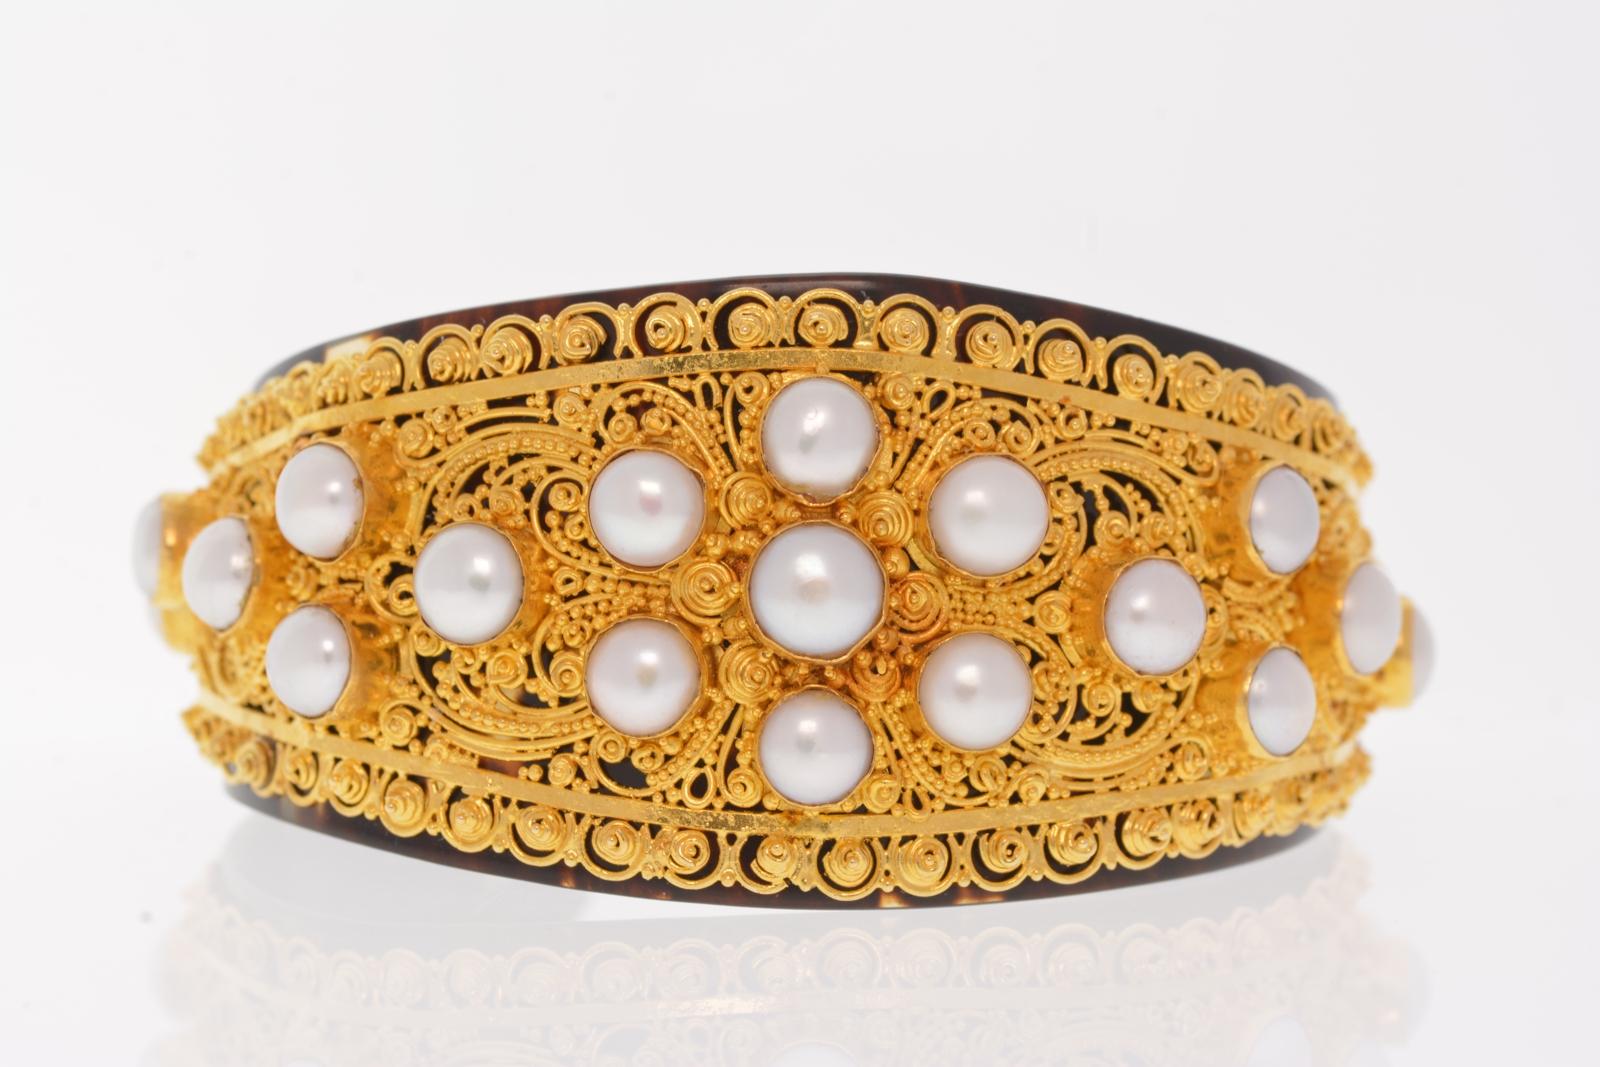 Freshwater Pearl 22K Yellow Gold Cuff Bracelet on Faux Tortoise Shell Back

Main Stone:
Freshwater Pearl
Metal:
22K Yellow Gold
Total Gram Weight:
42.20
Style:
Cuff (mounted on Faux Tortoise Shell Back)

JESSUP'S PRICE: $2990.00

#160187-11
Such an